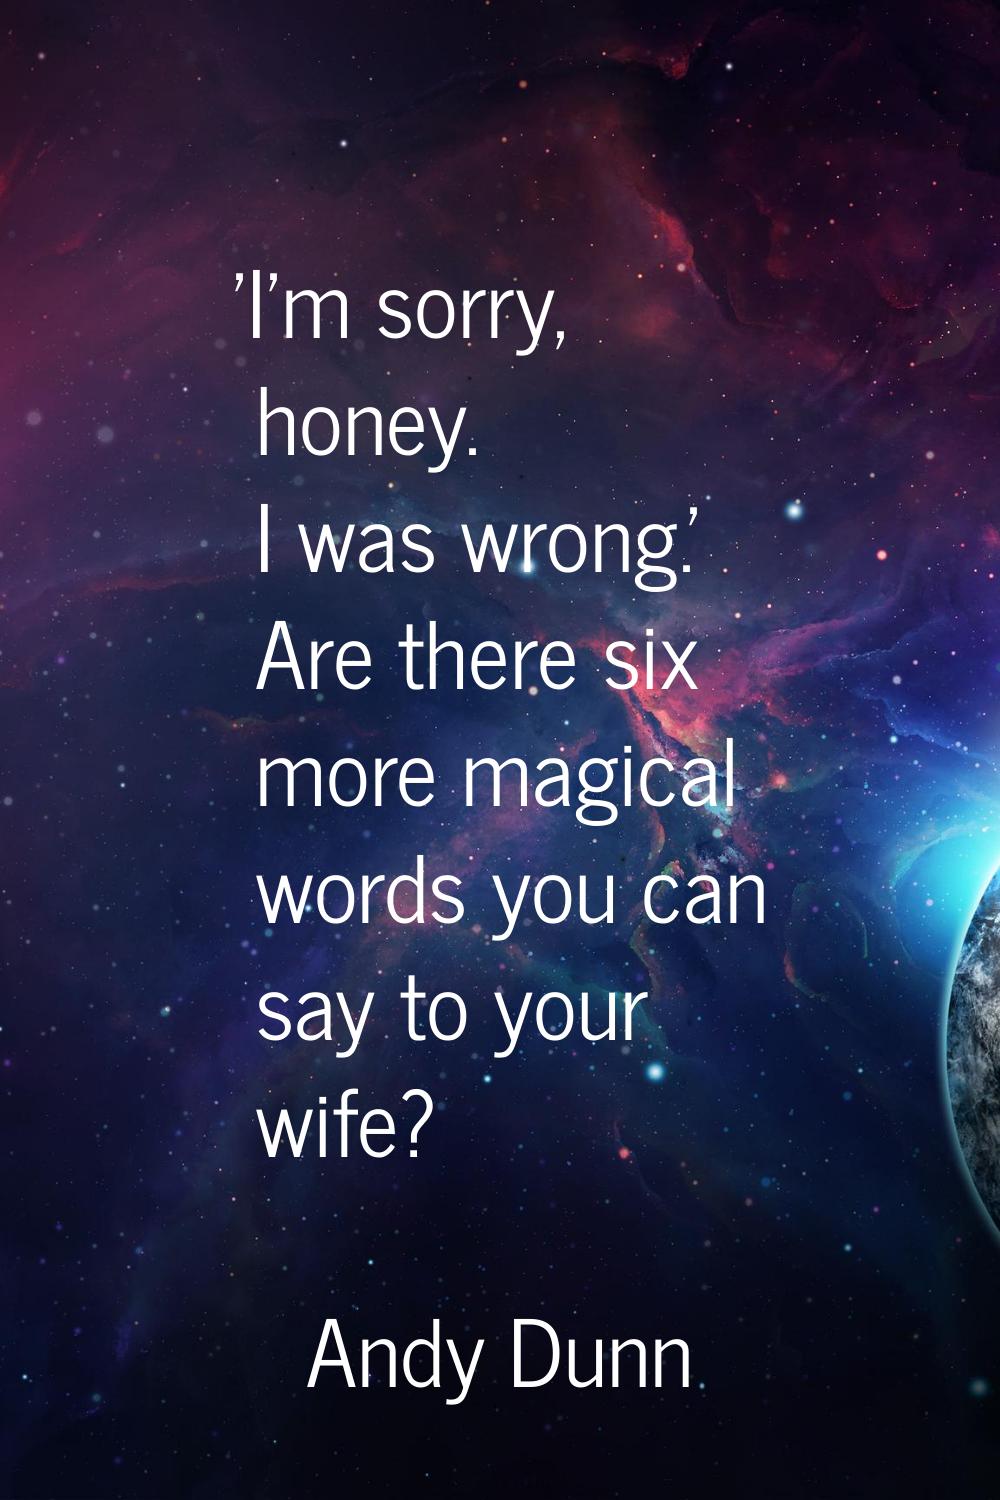 'I'm sorry, honey. I was wrong.' Are there six more magical words you can say to your wife?